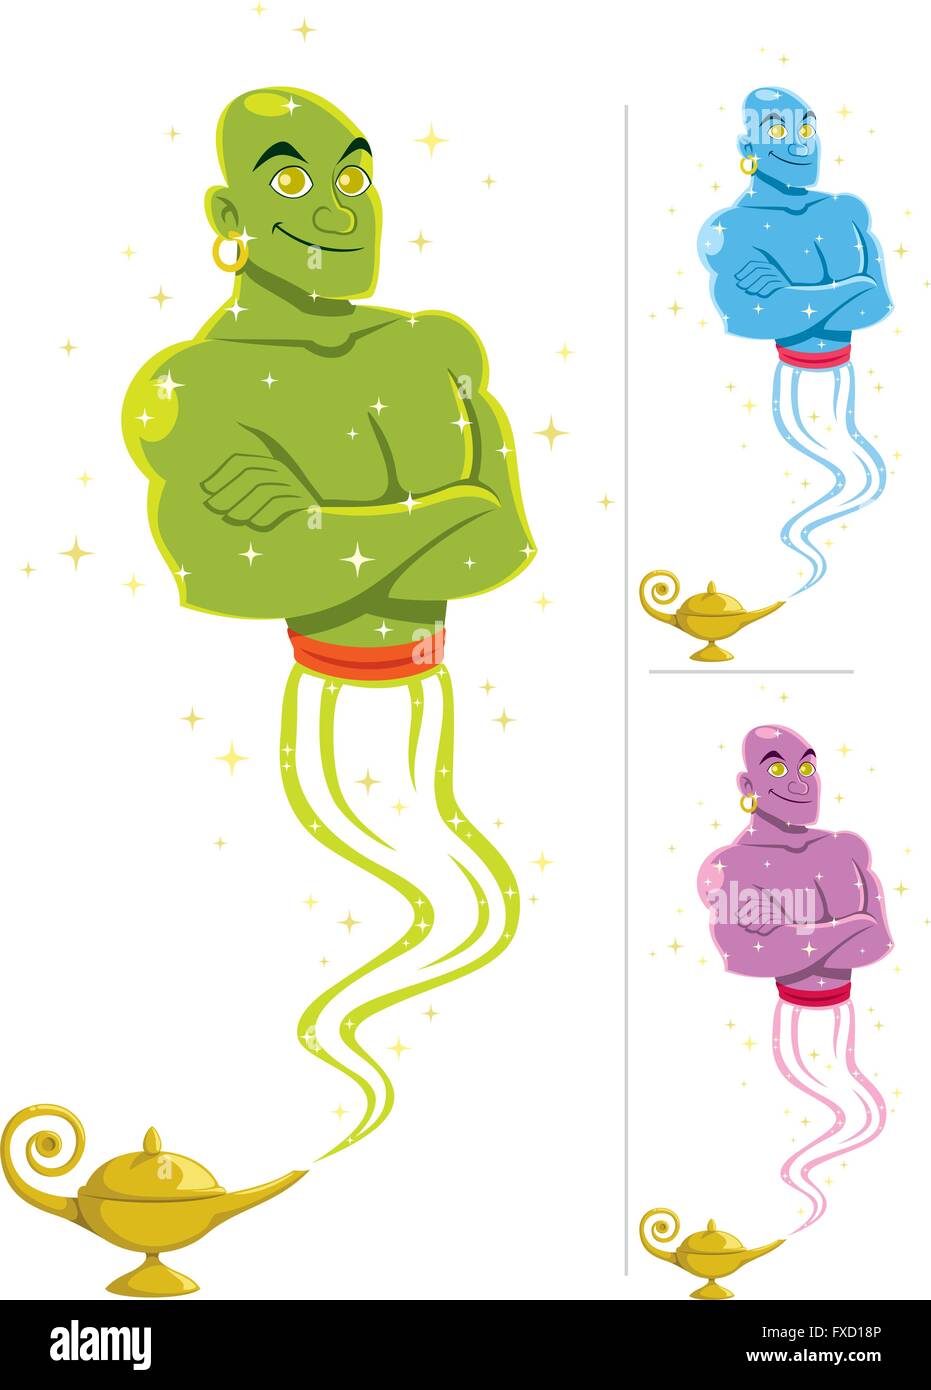 The genie just came out of the lamp and awaits your 3 wishes. Stock Vector